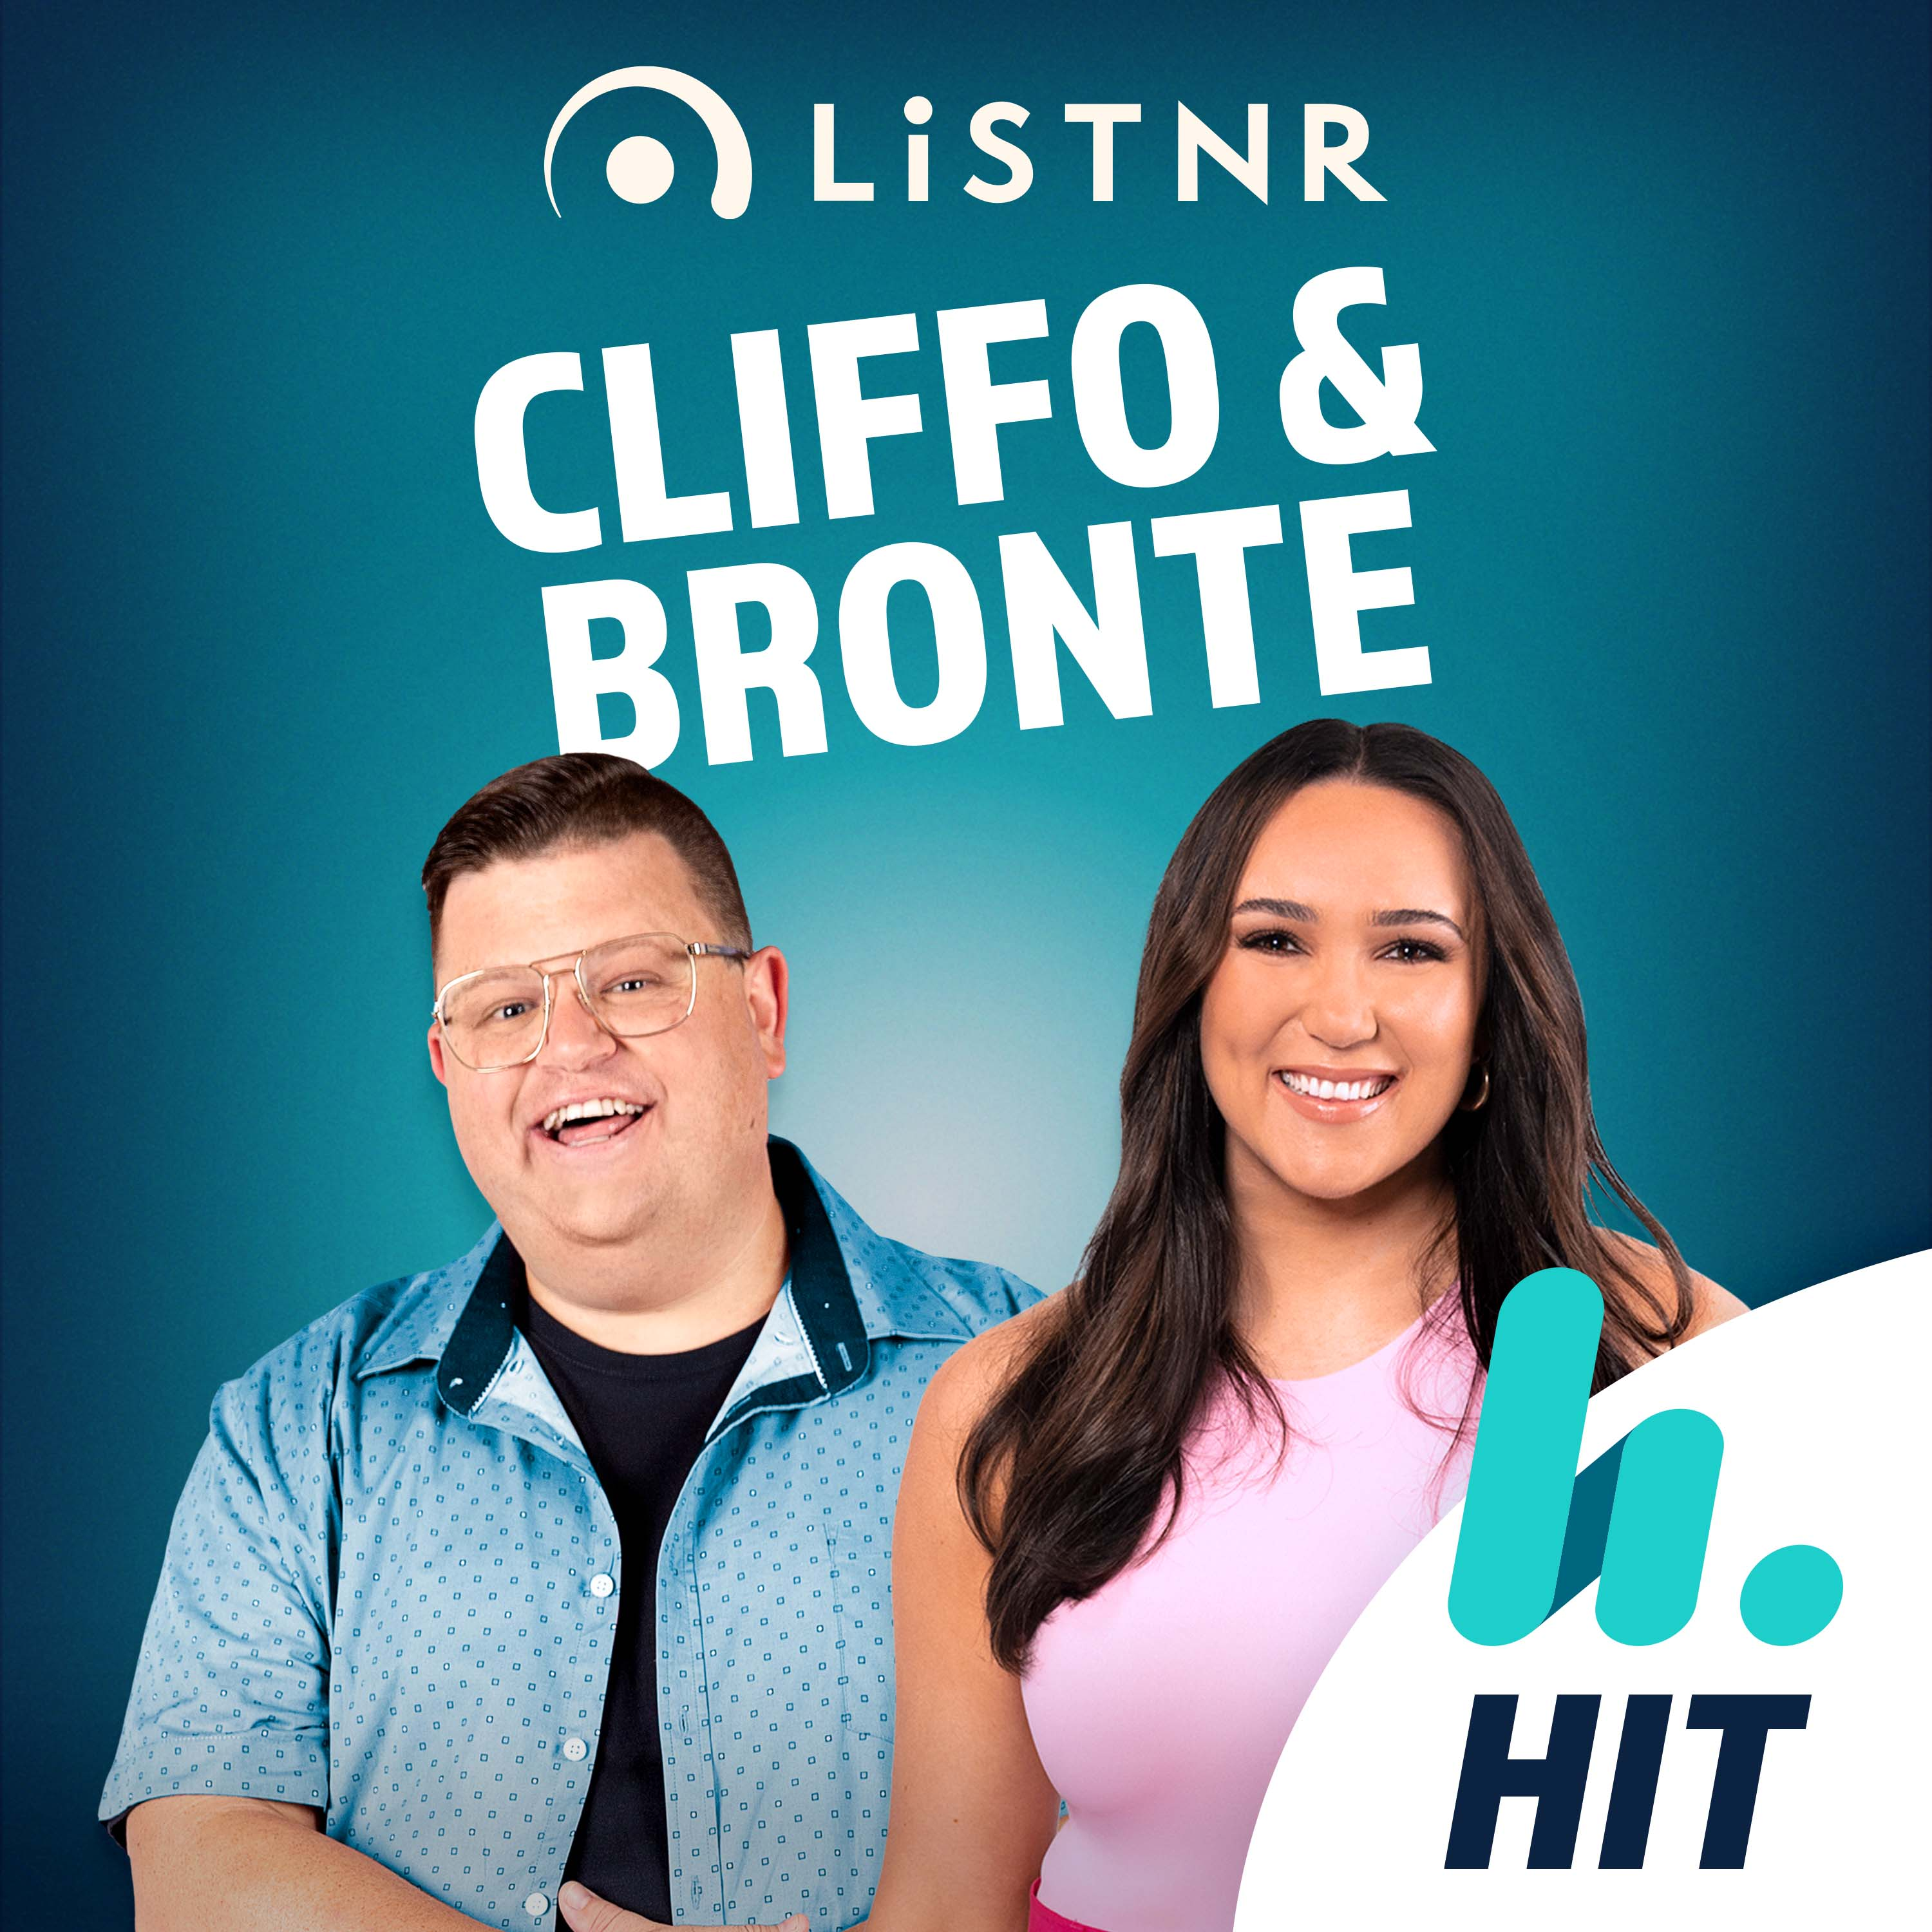 TUESDAY HIGHLIGHTS - Paul green to depart Cowboys (the goss with Ben Hannant) - Hit the Hill news - Have you lost a tooth as an adult? Gabi's 13CABS observation - Woine Toime!!!